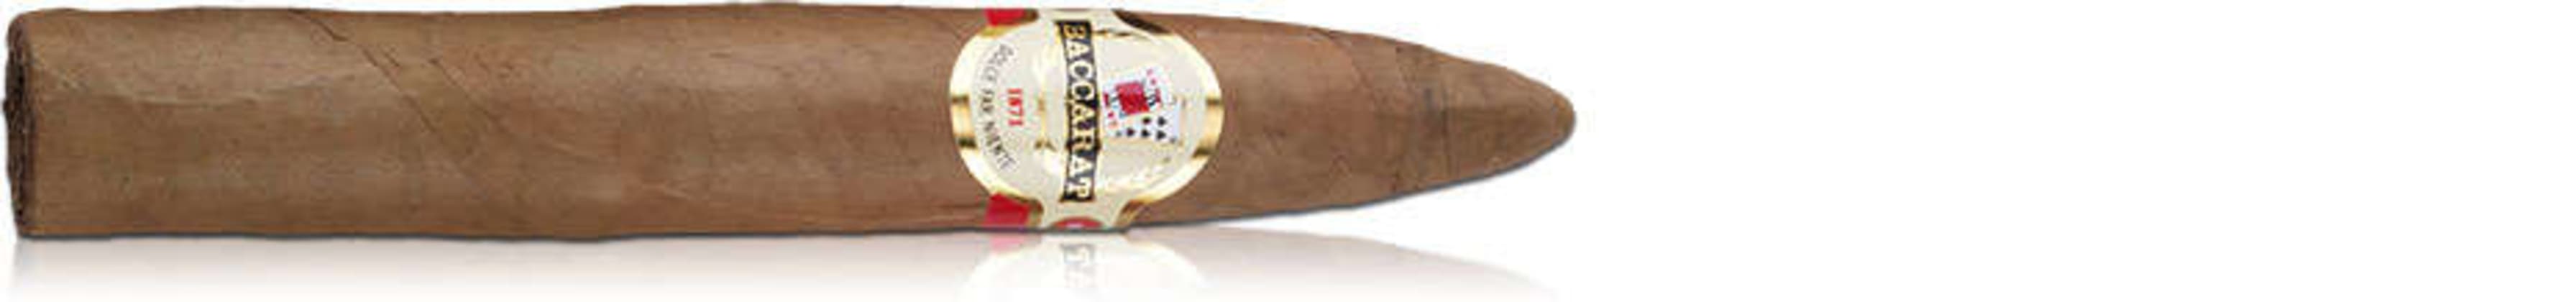 Baccarat Belicoso Single